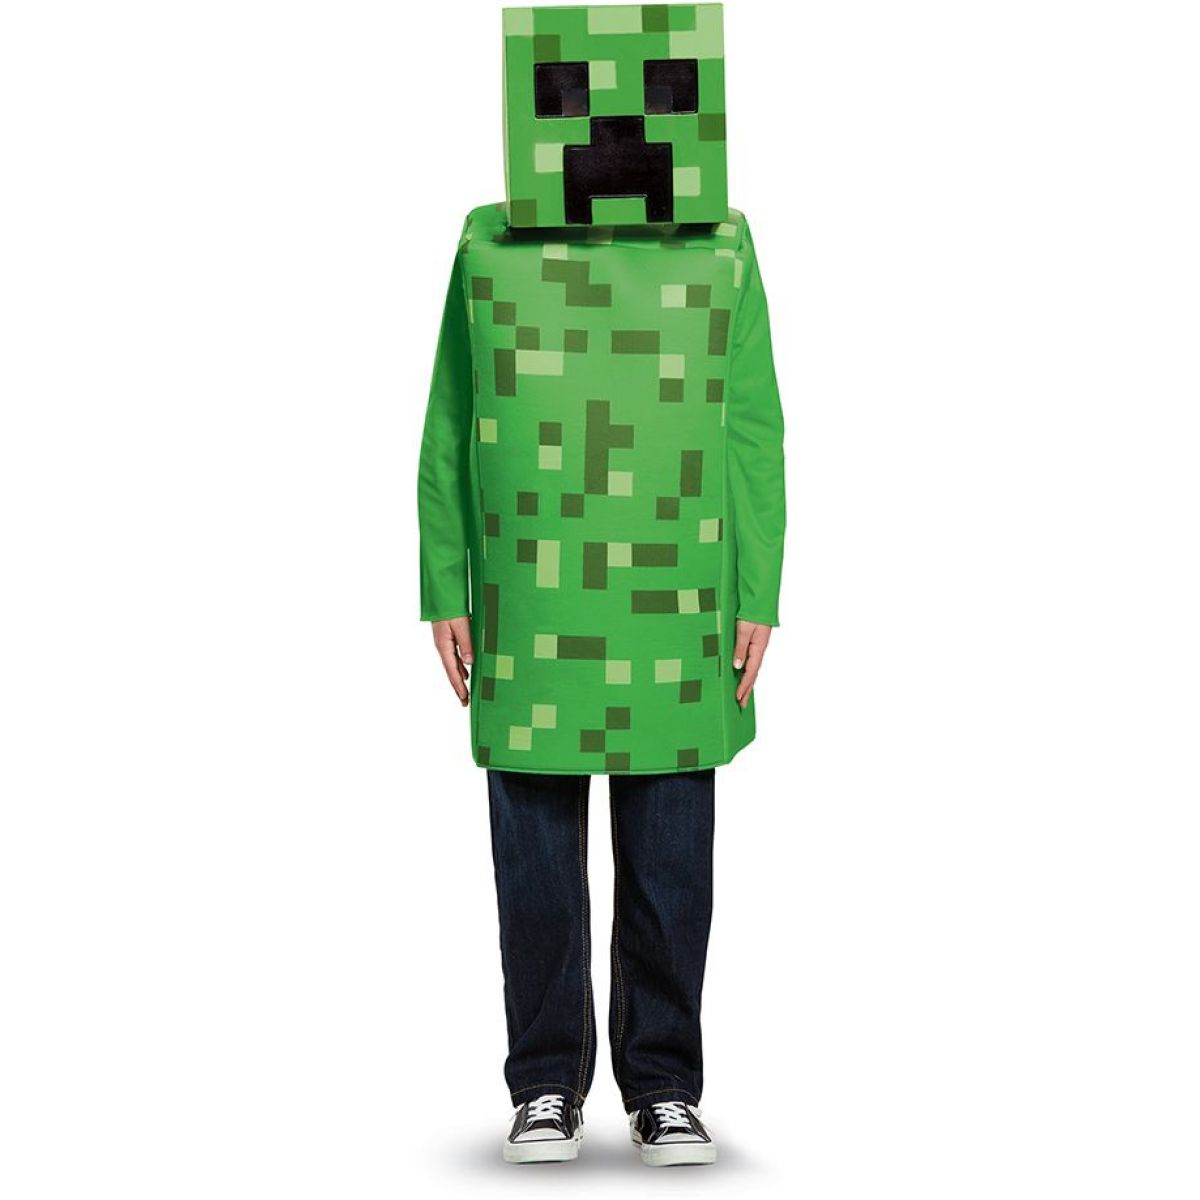 Epee Minecraft Creeper kostým 10 - 12 let